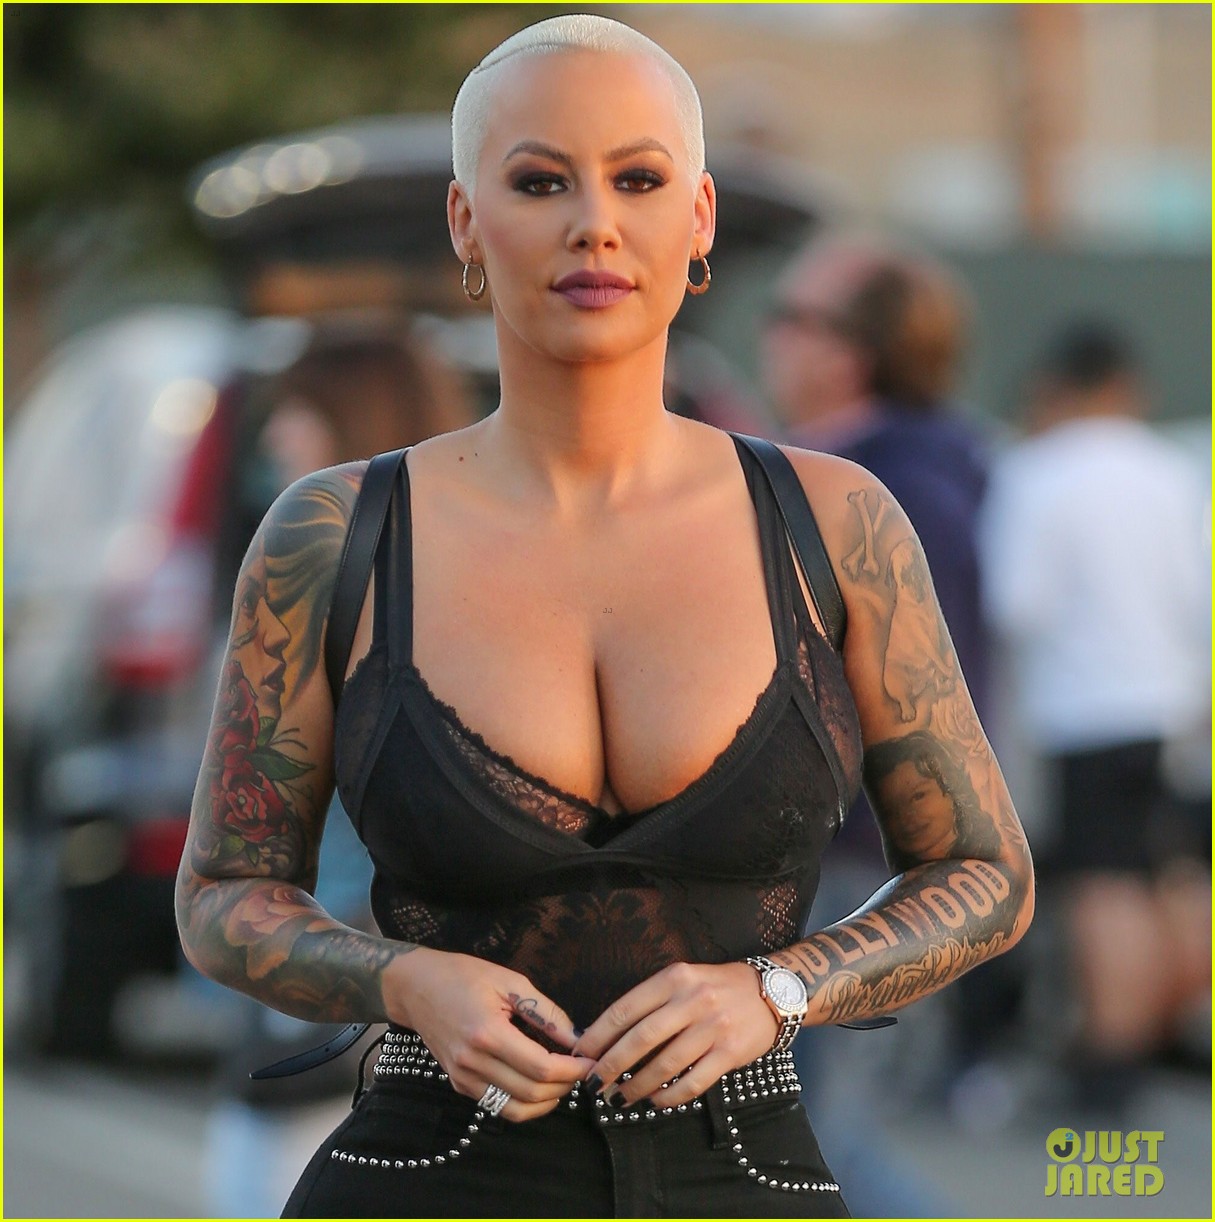 Amber Rose Challenges Fans to Post Their Own 'Fire Ass Feminist Post&a...